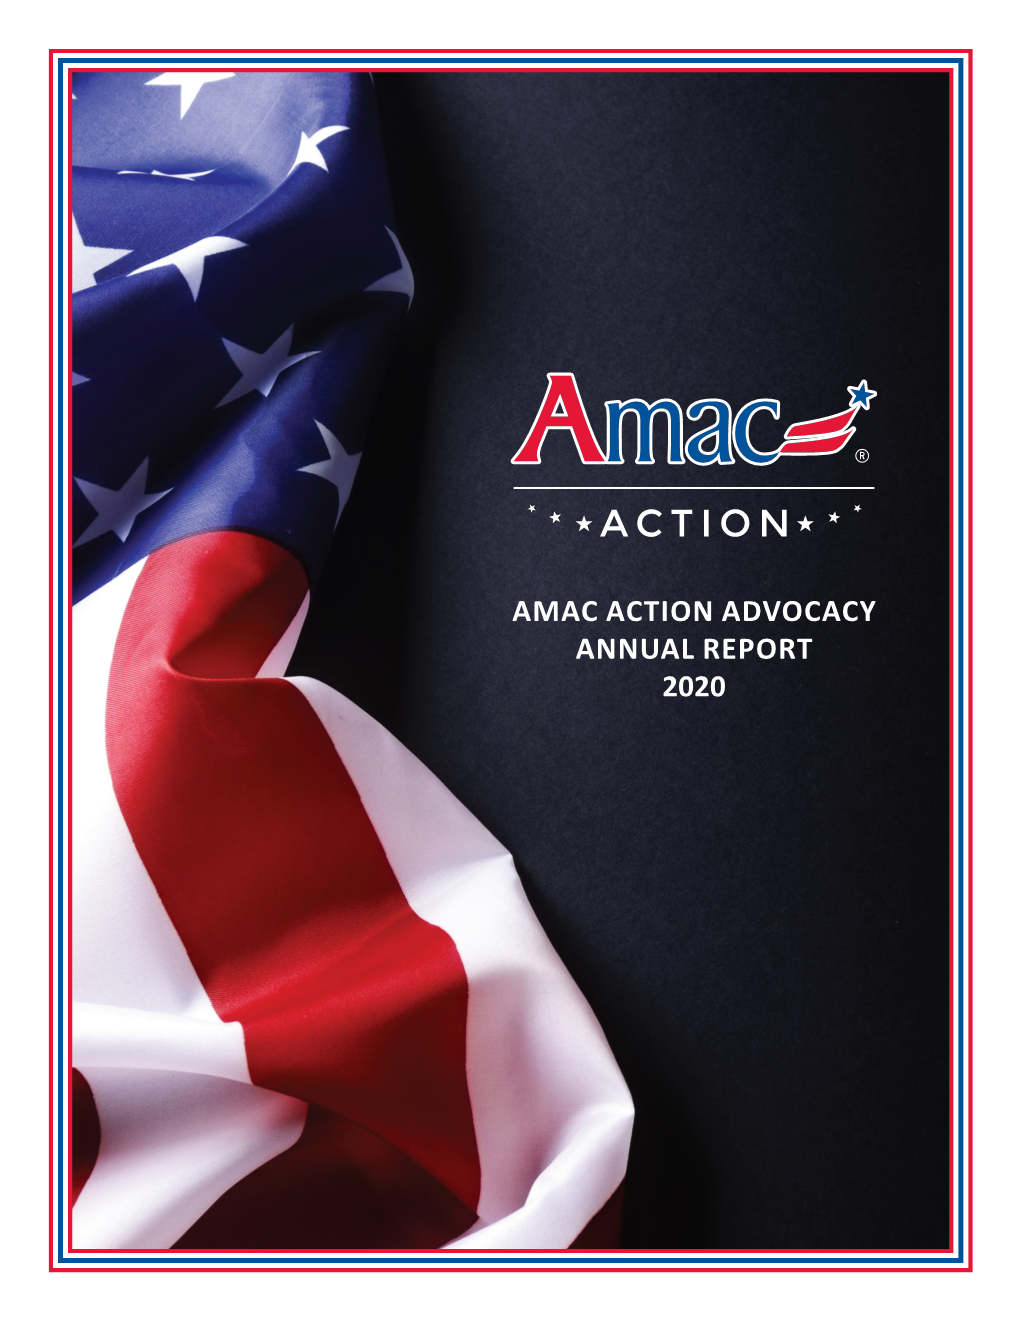 Amac Action Advocacy Annual Report 2020 Amac Action Advocacy Annual Report 2020